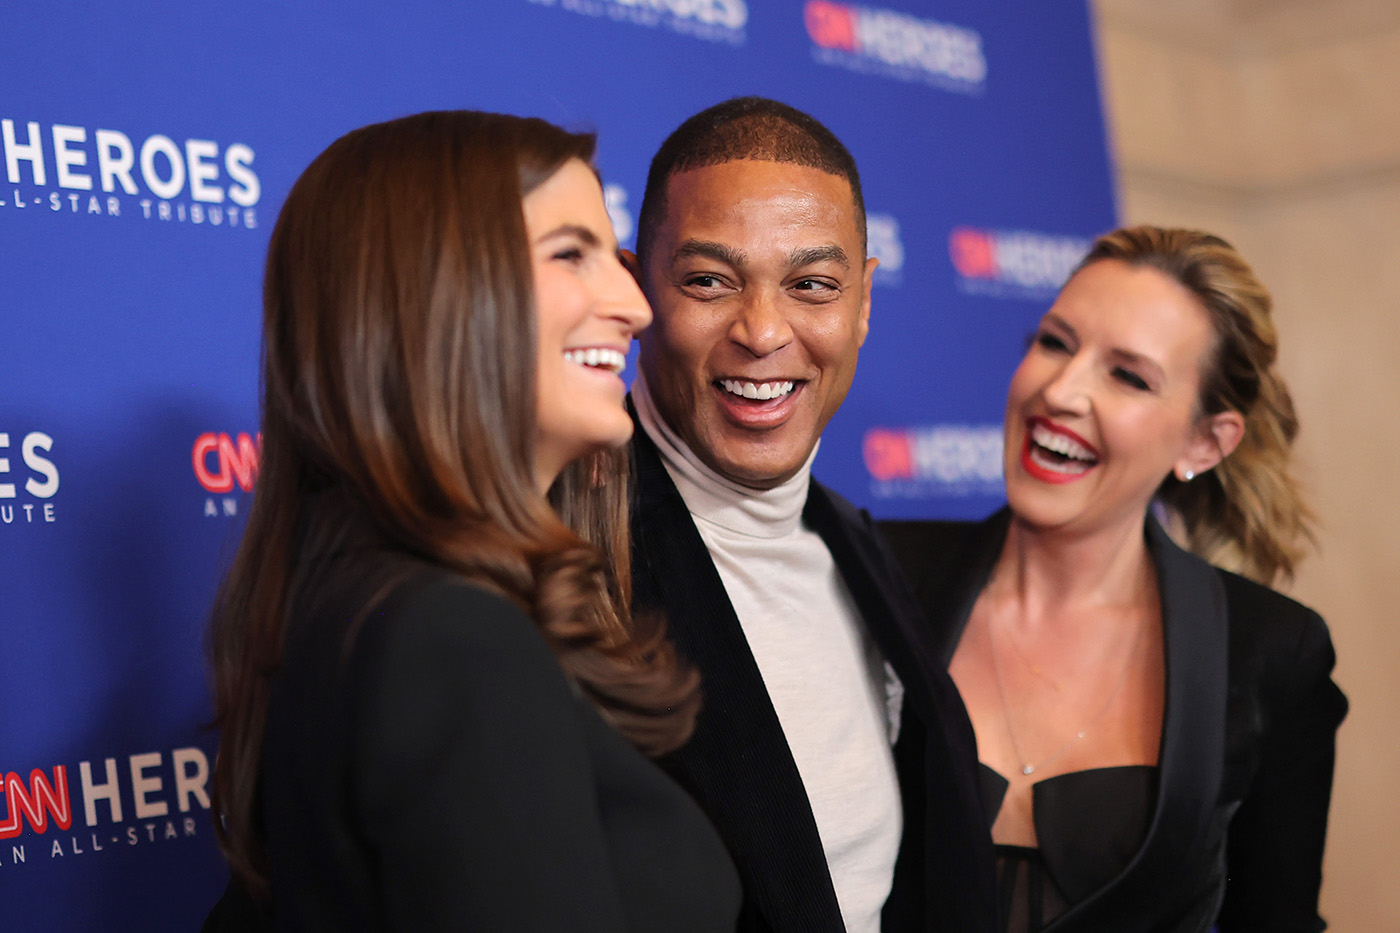 Kaitlan Collins, Don Lemon, and Poppy Harlow smile at eachother in front of a step and repeat